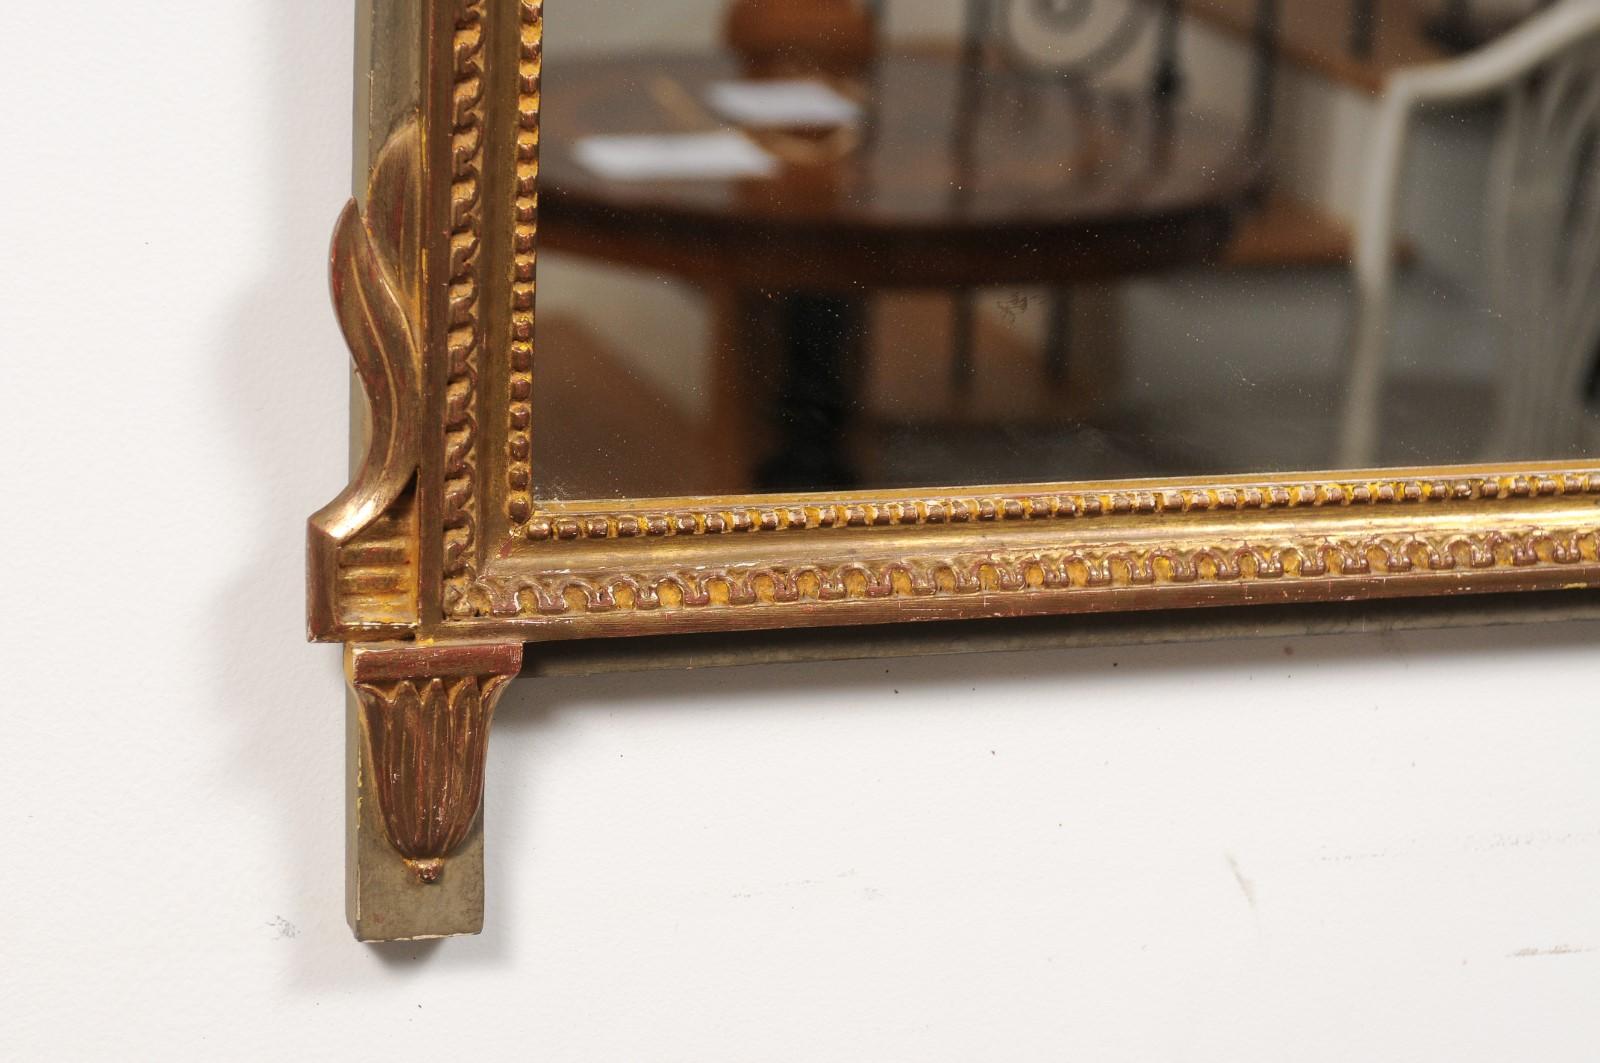 Louis XVI Style Gilt Wood Mirror with Floral Carved Medallion Crest and Tassels For Sale 2